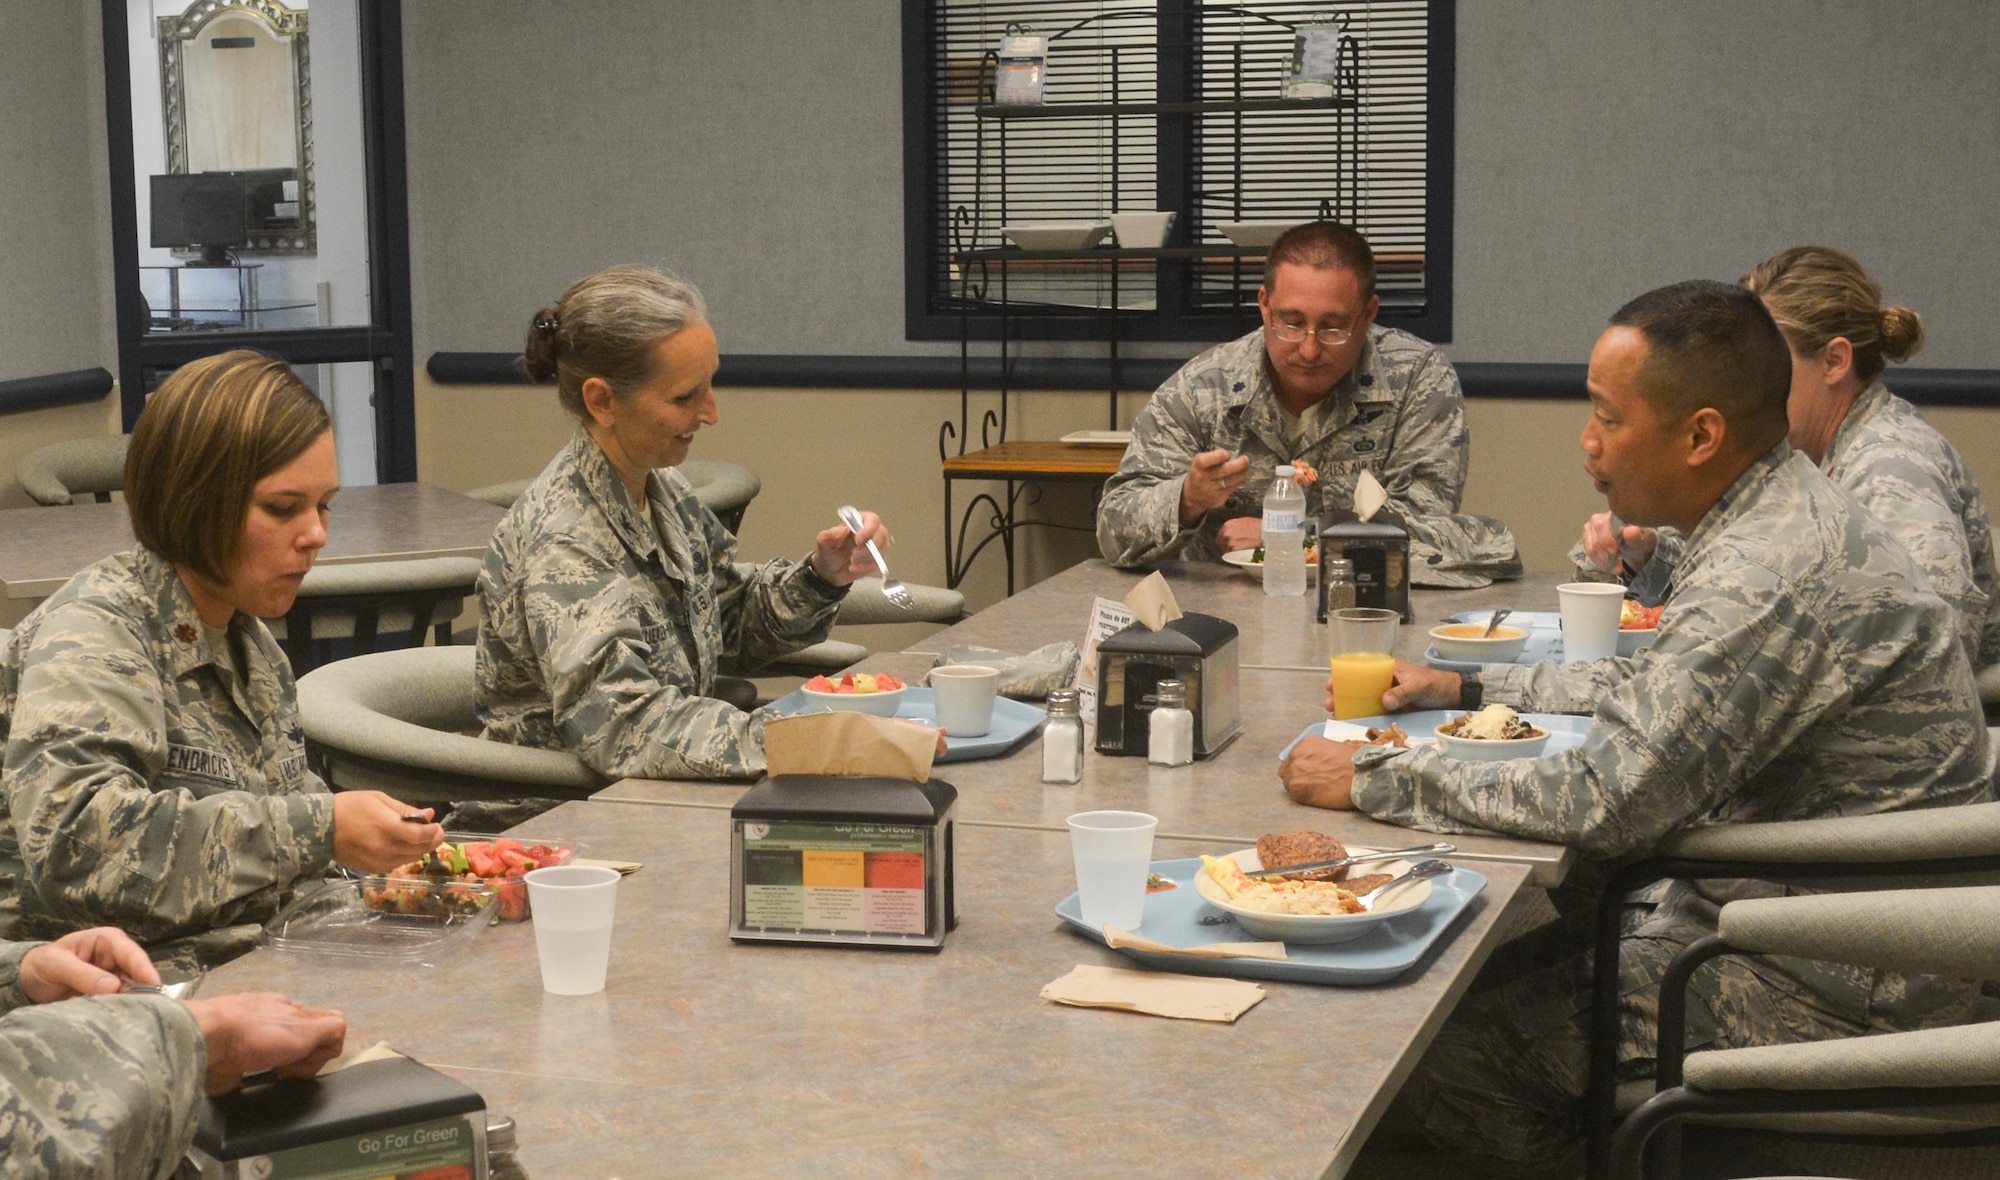 VANDENBERG AIR FORCE BASE, Cali. -- Col. Traci Kueker-Murphy, 310th Space Wing commander, visits with members of the 9th Combat Operations Squadron during an officers luncheon at the base dining facility on Sunday, July 9, 2017. Kueker-Murphy and Command Chief Master Sgt. Todd Scott visited 9 COS to get better insight of this geographically separated unit during the July Unit Training Assembly. (U.S. Air Force photo/Senior Airman Laura Turner)